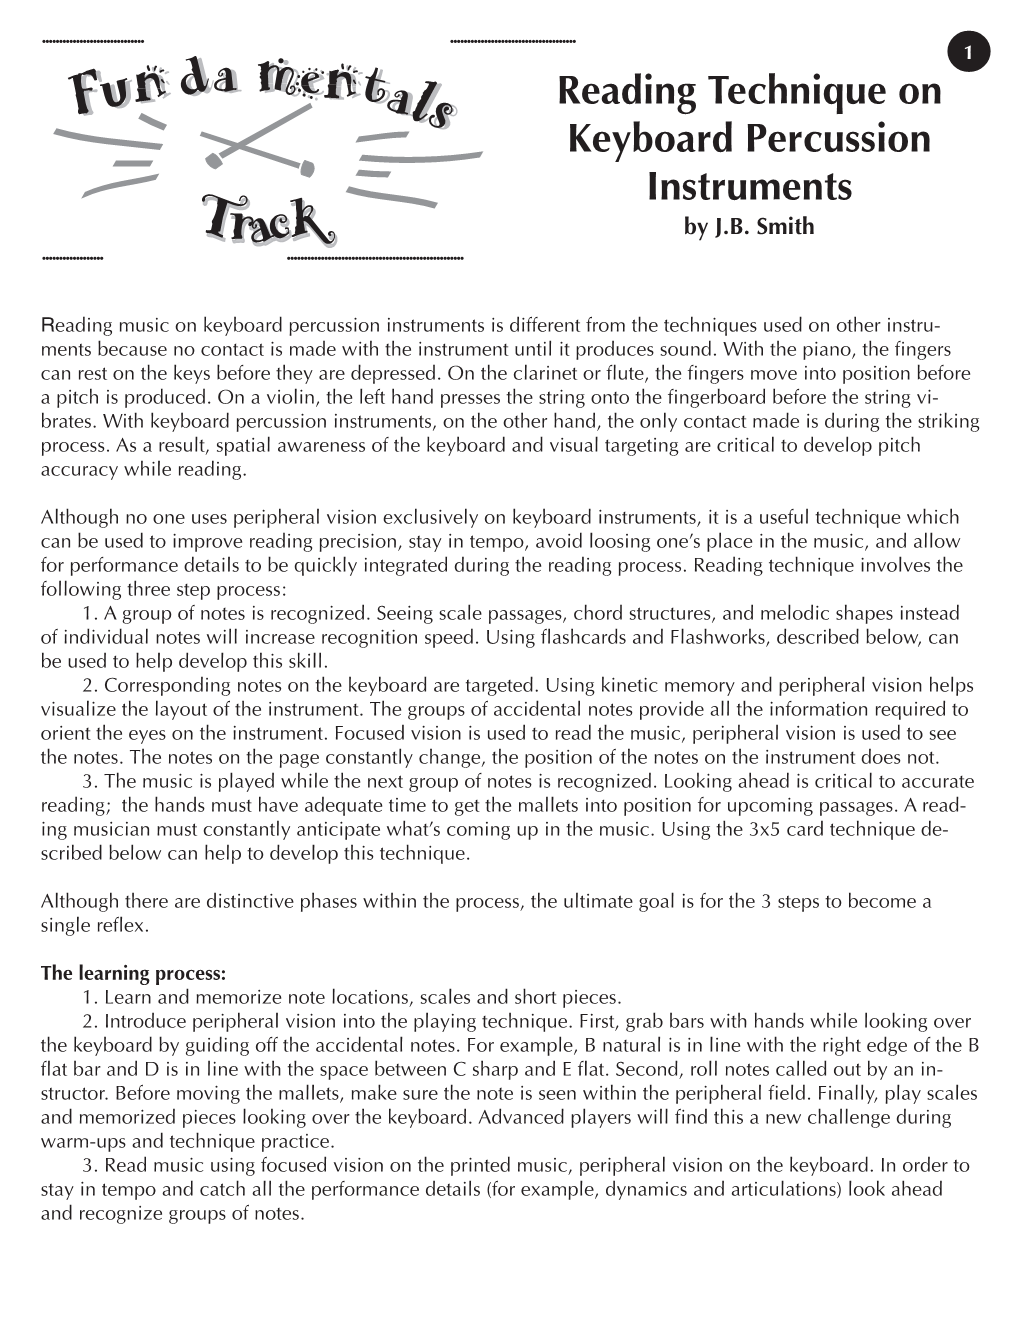 Reading Technique on Keyboard Percussion Instruments